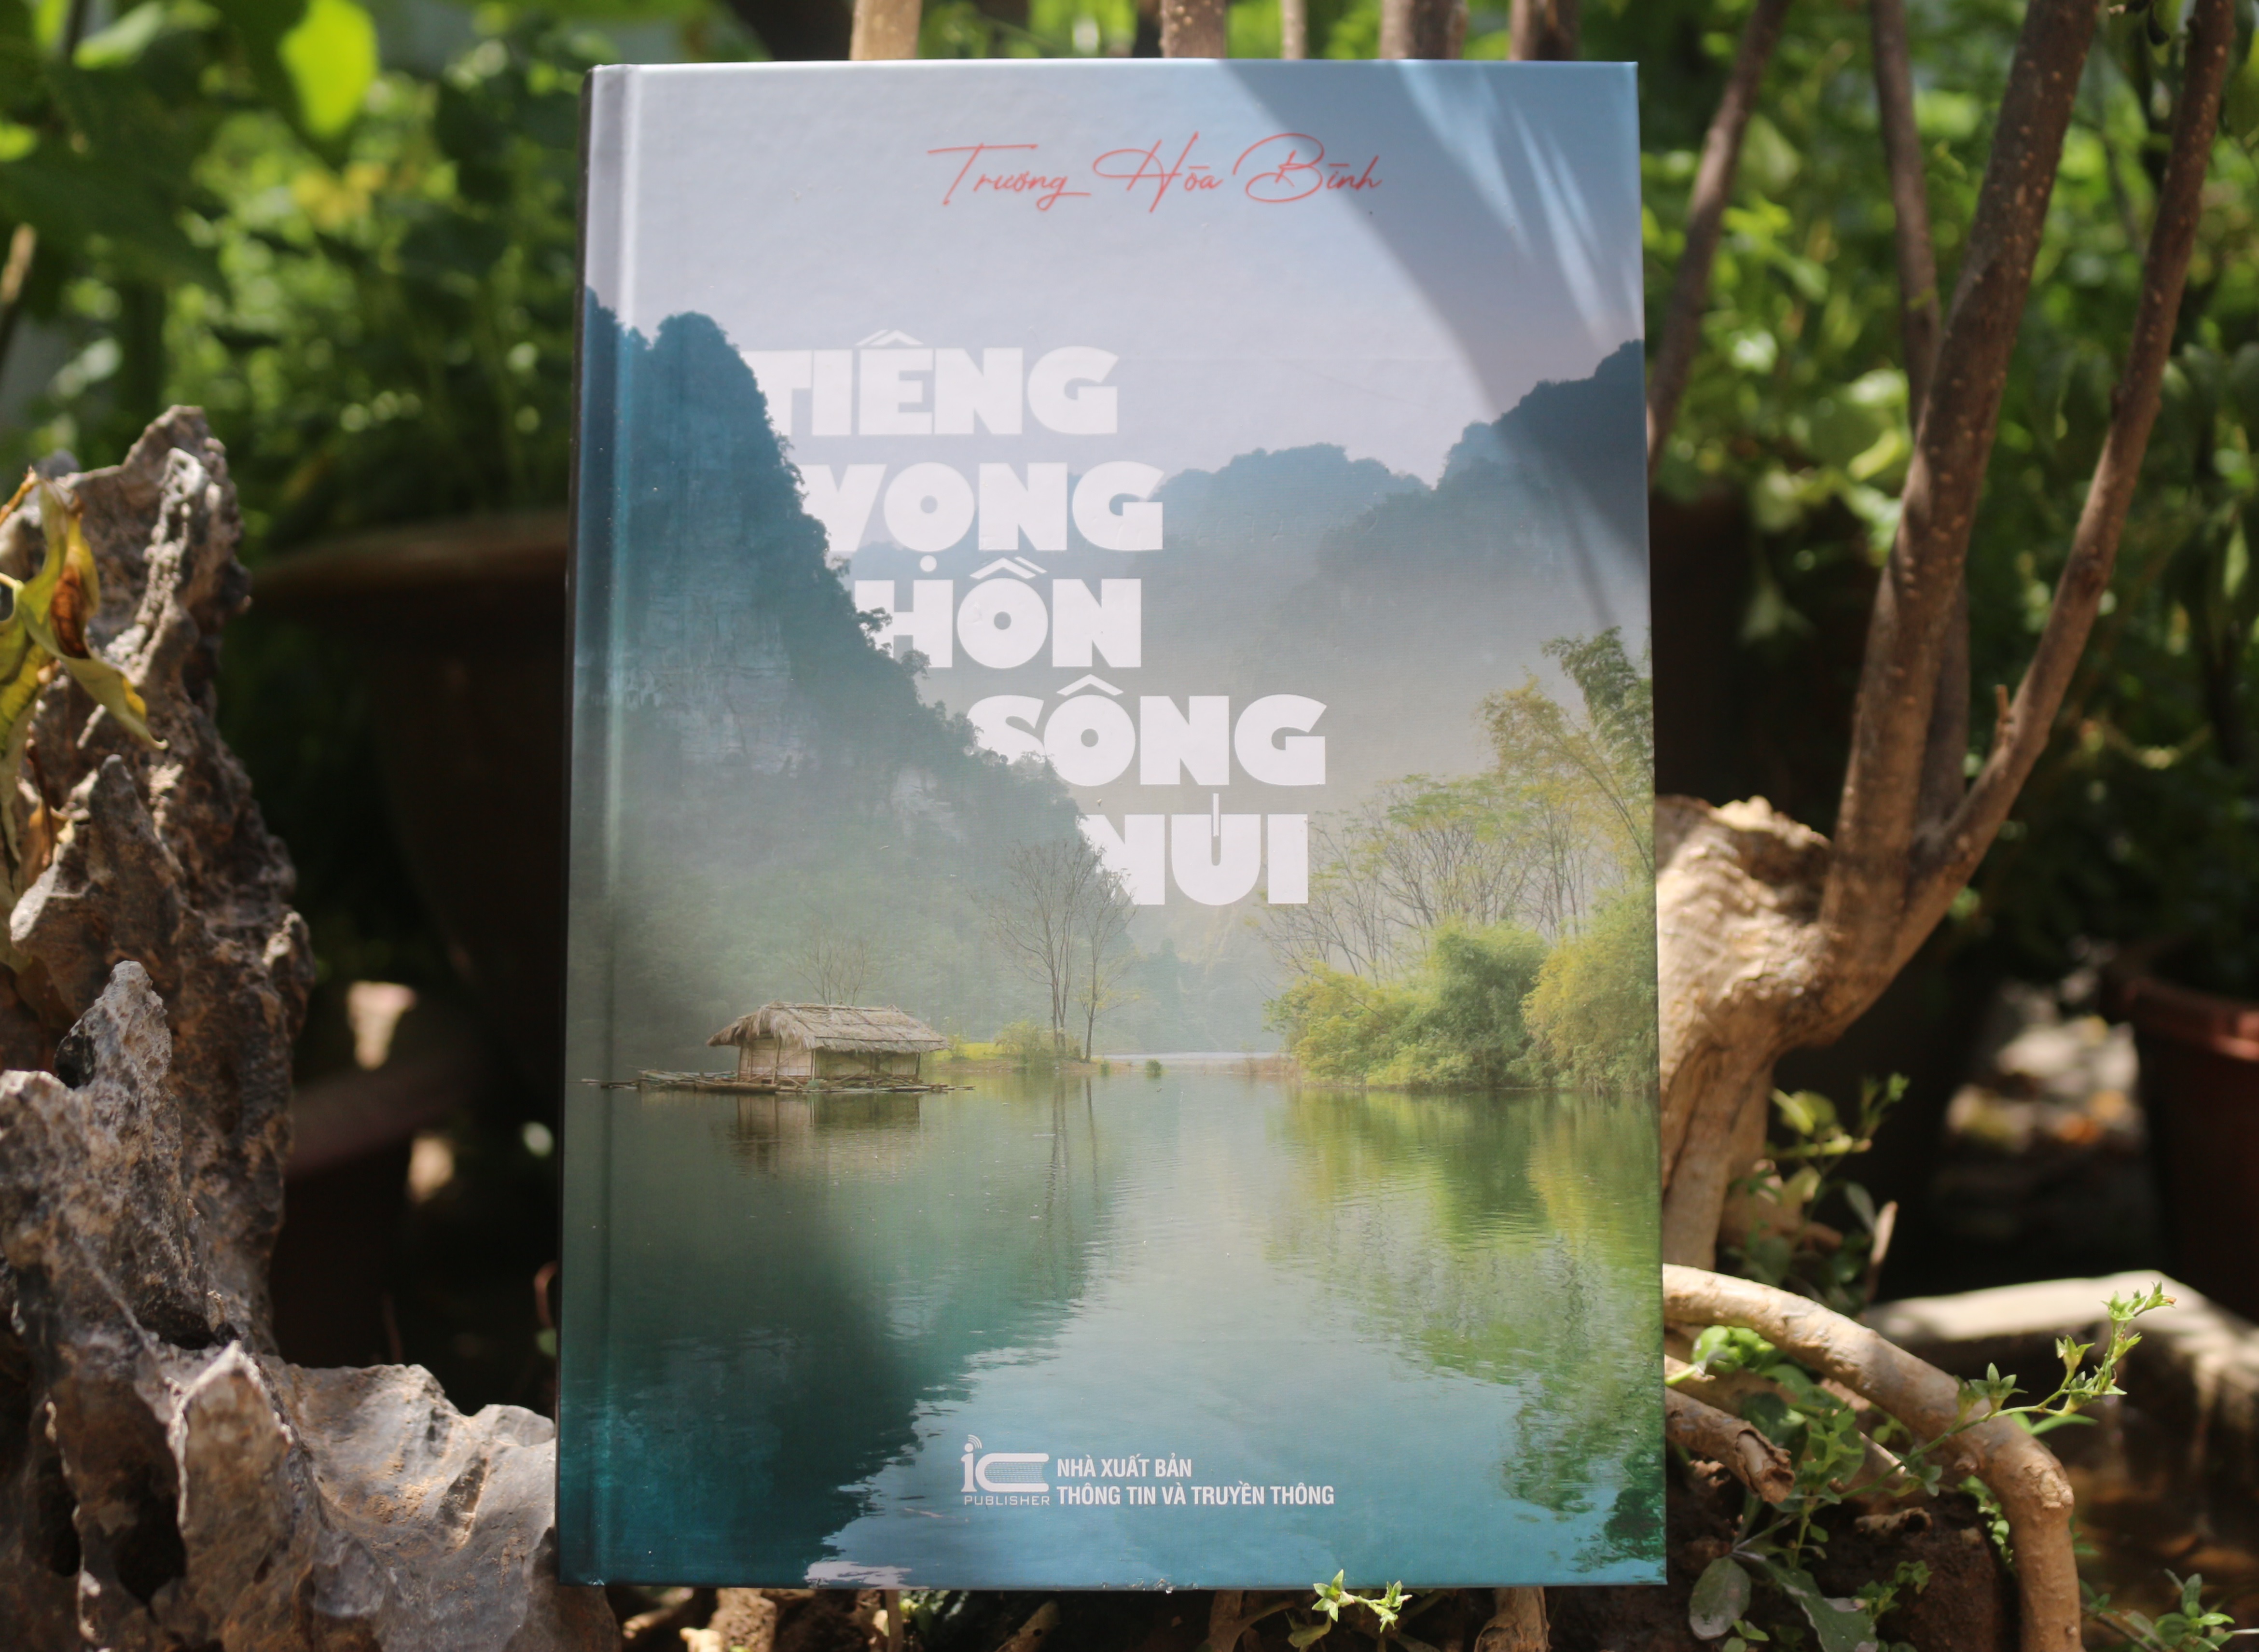 Tieng vong hon song nui anh 1